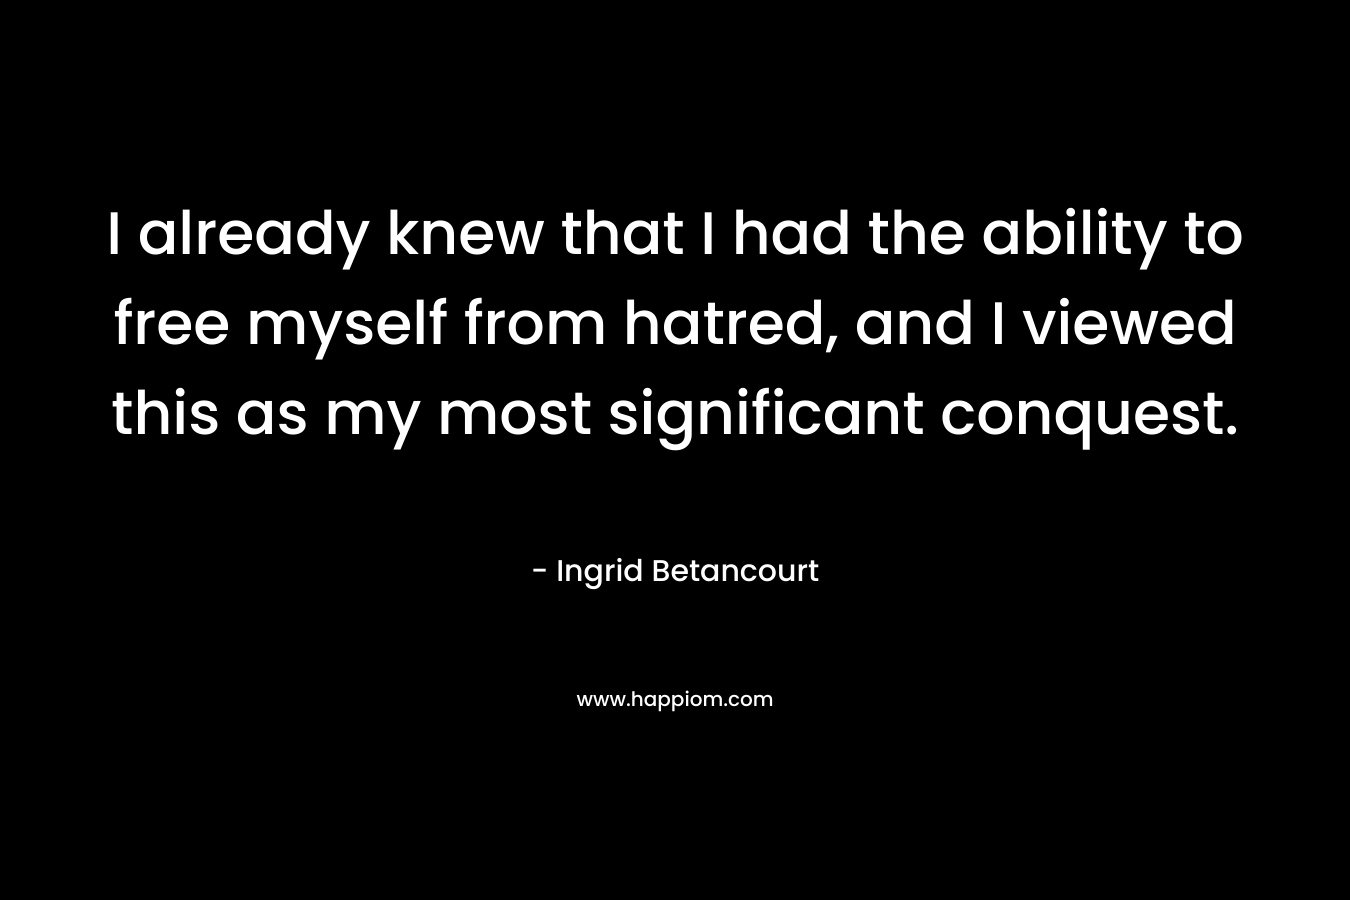 I already knew that I had the ability to free myself from hatred, and I viewed this as my most significant conquest. – Ingrid Betancourt